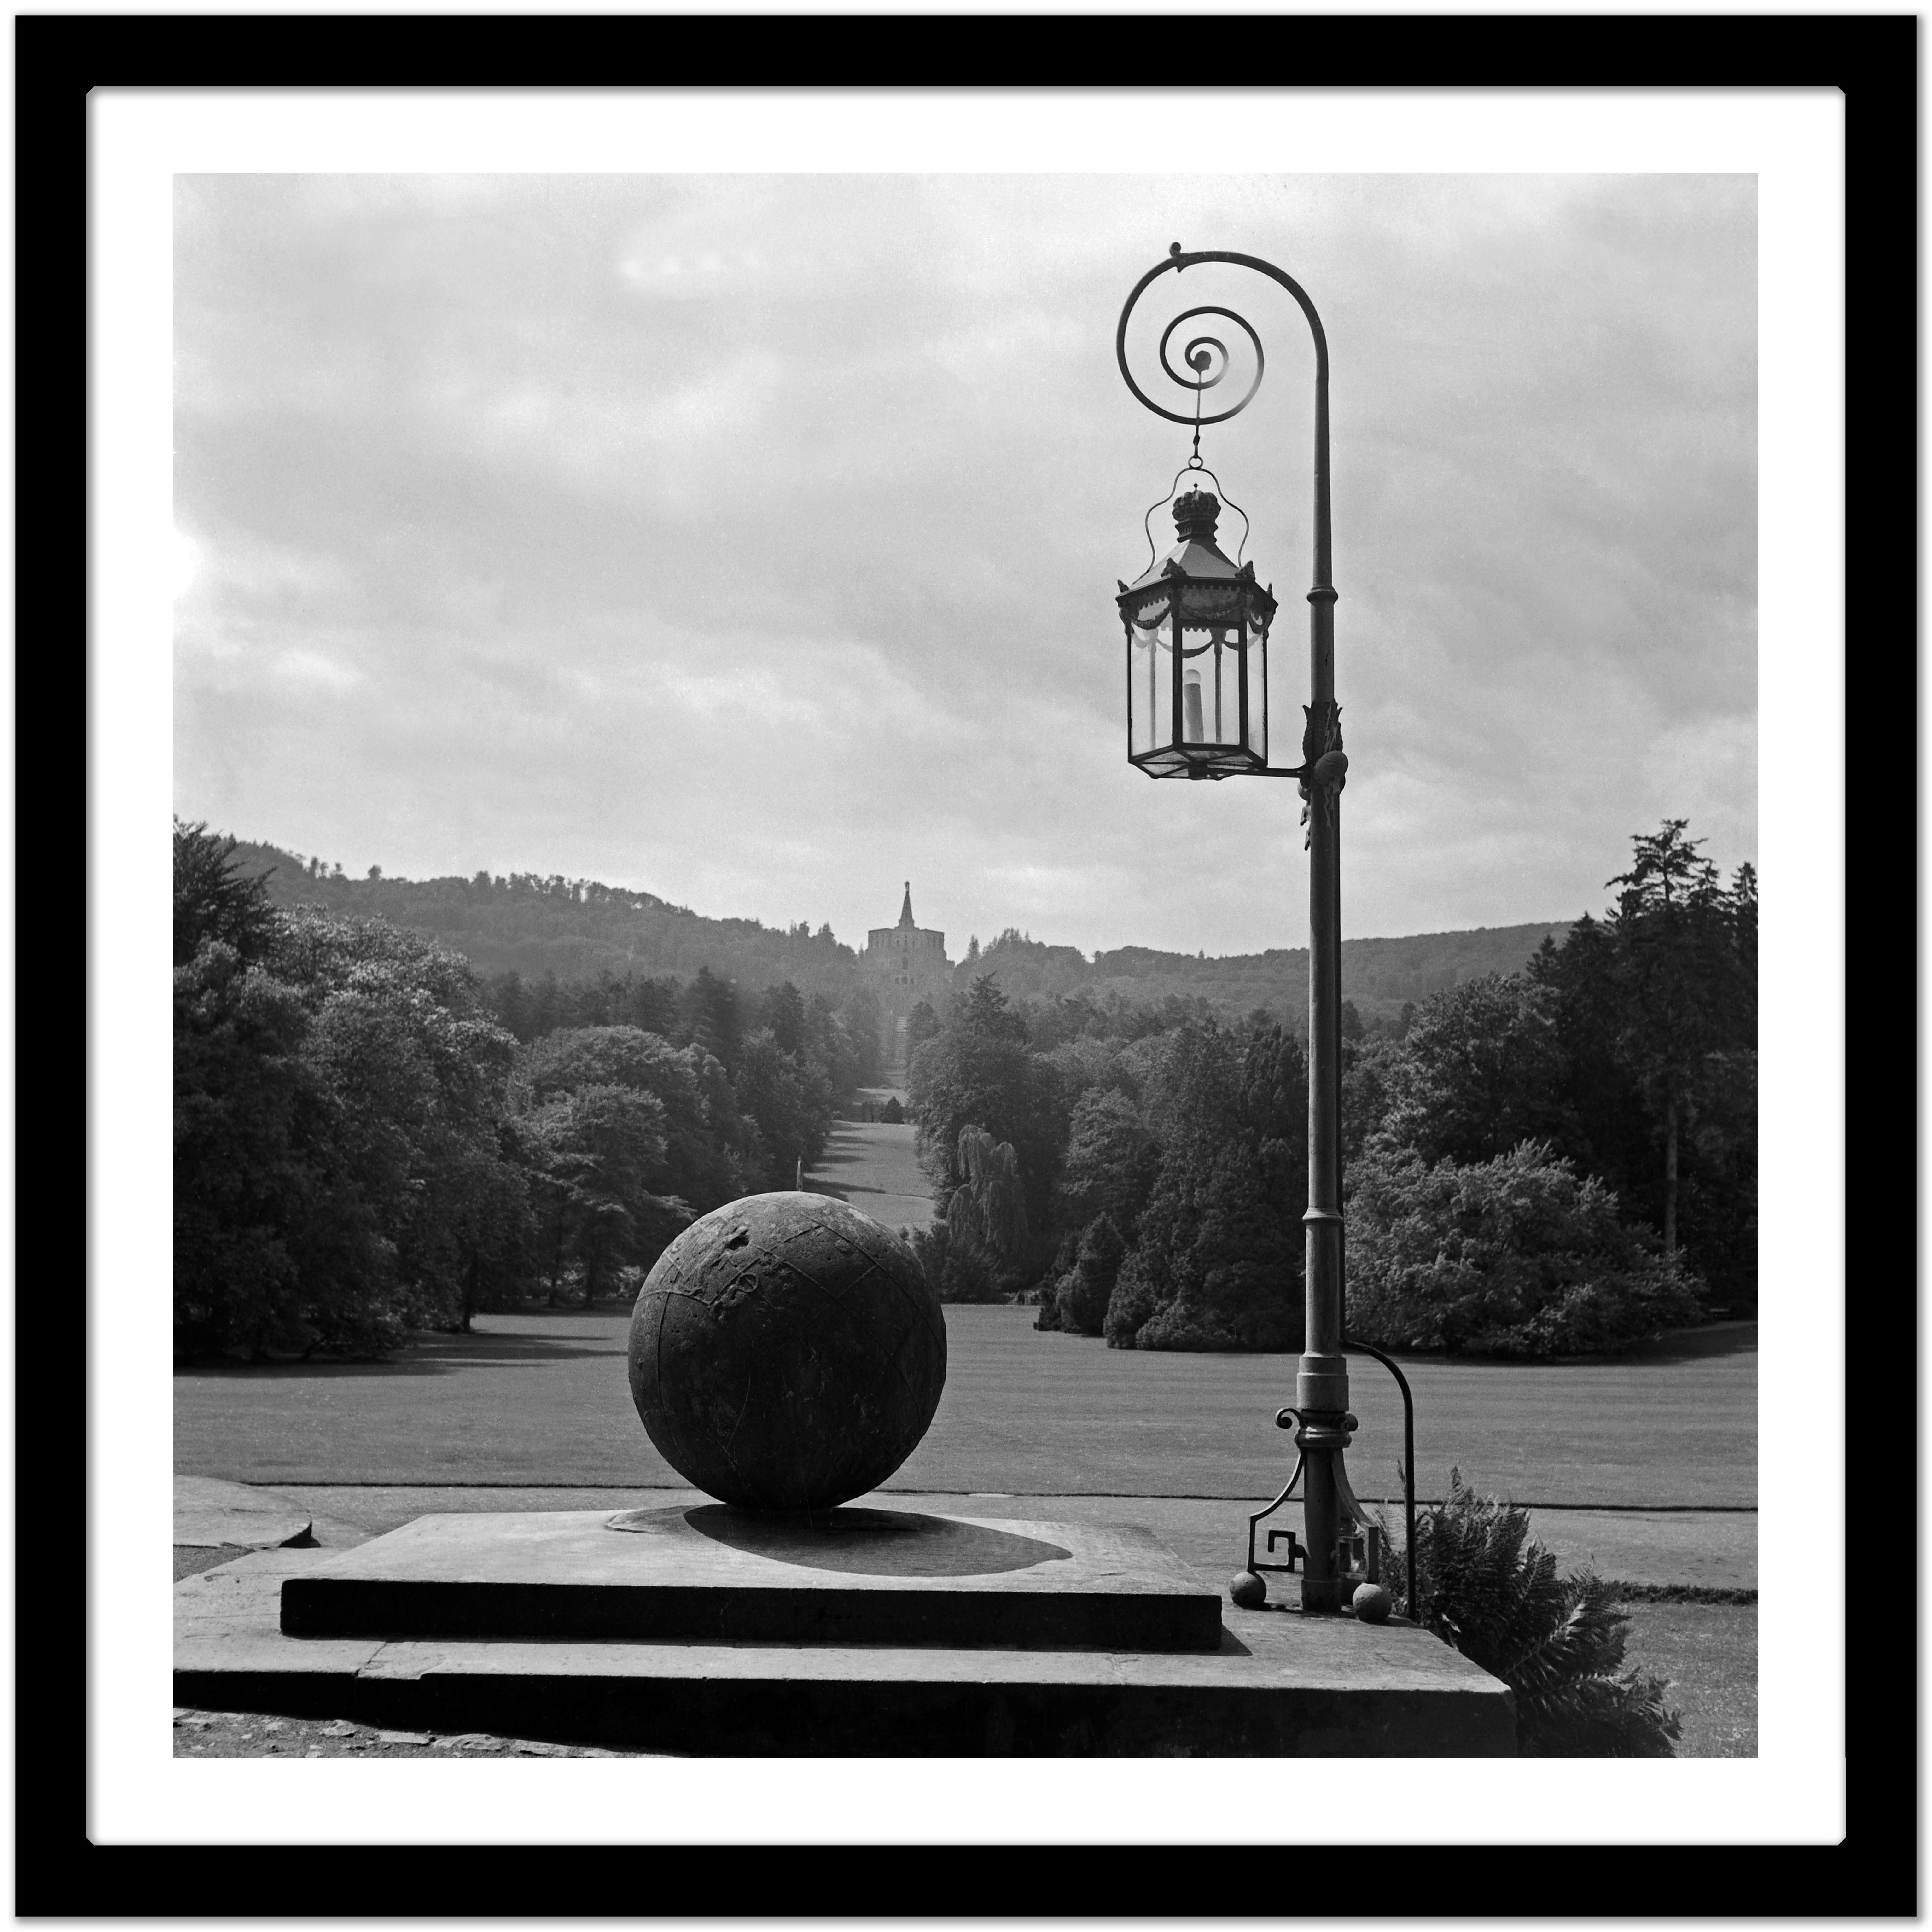 View to the park at Kassel from Wilhelmshoehe castle, Germany 1937 Printed Later - Gray Black and White Photograph by Karl Heinrich Lämmel